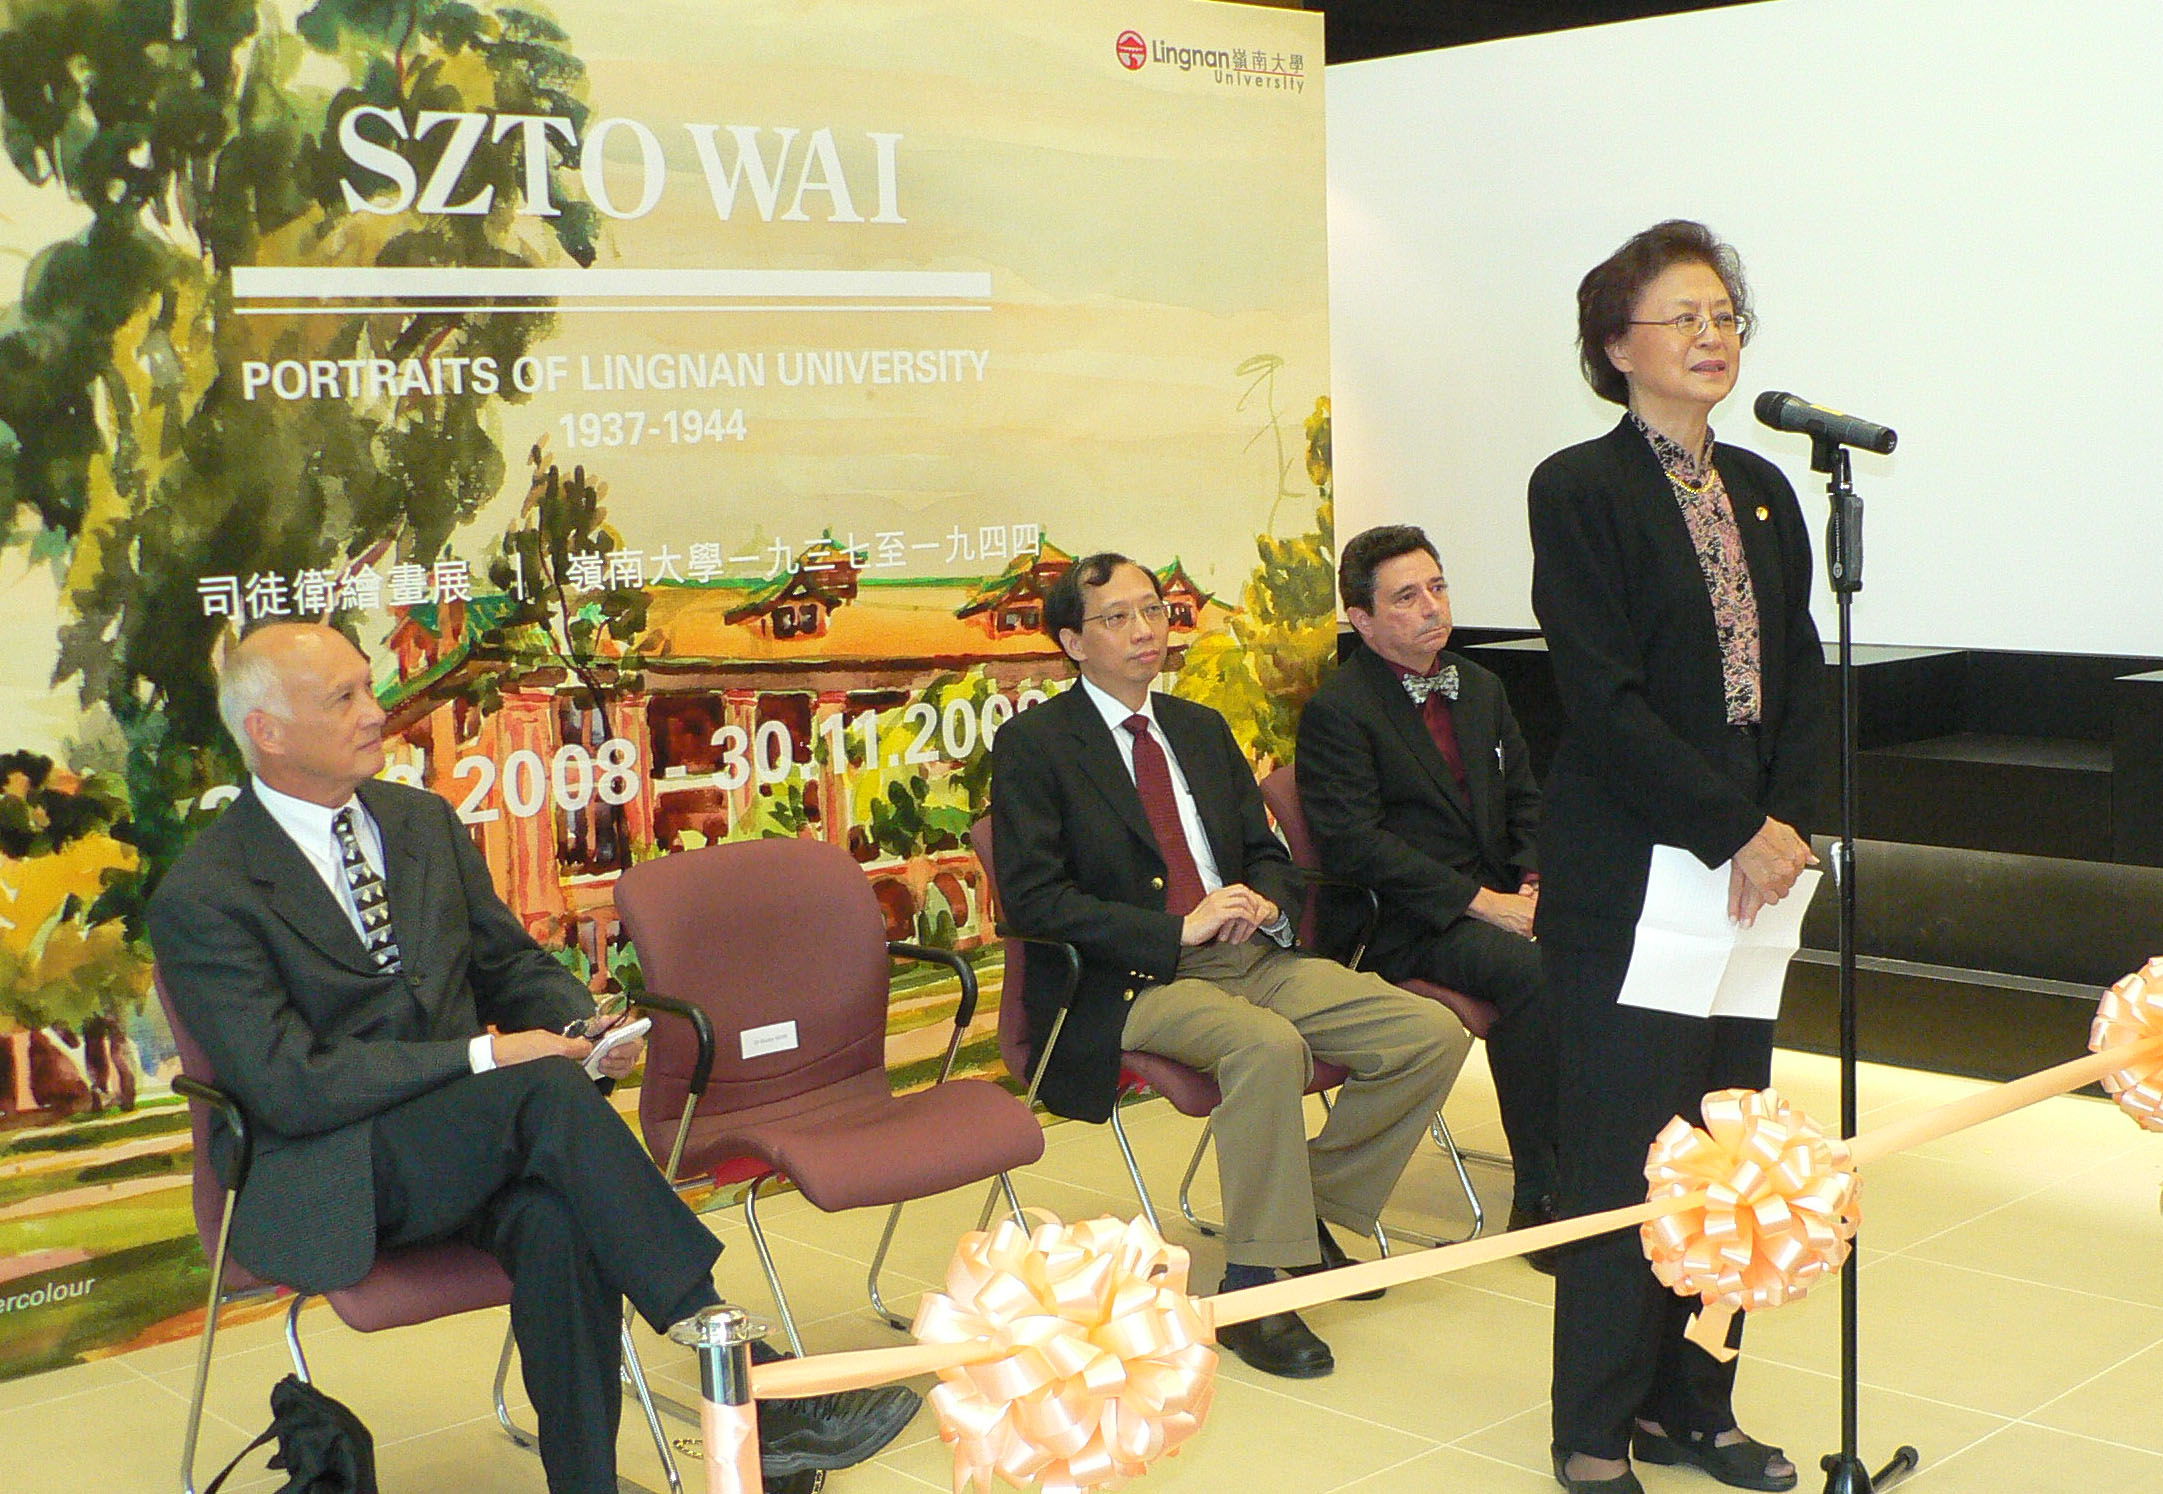 Dr Shirley Mow, Chairman of Lingnan Foundation, officiating at the exhibition opening.